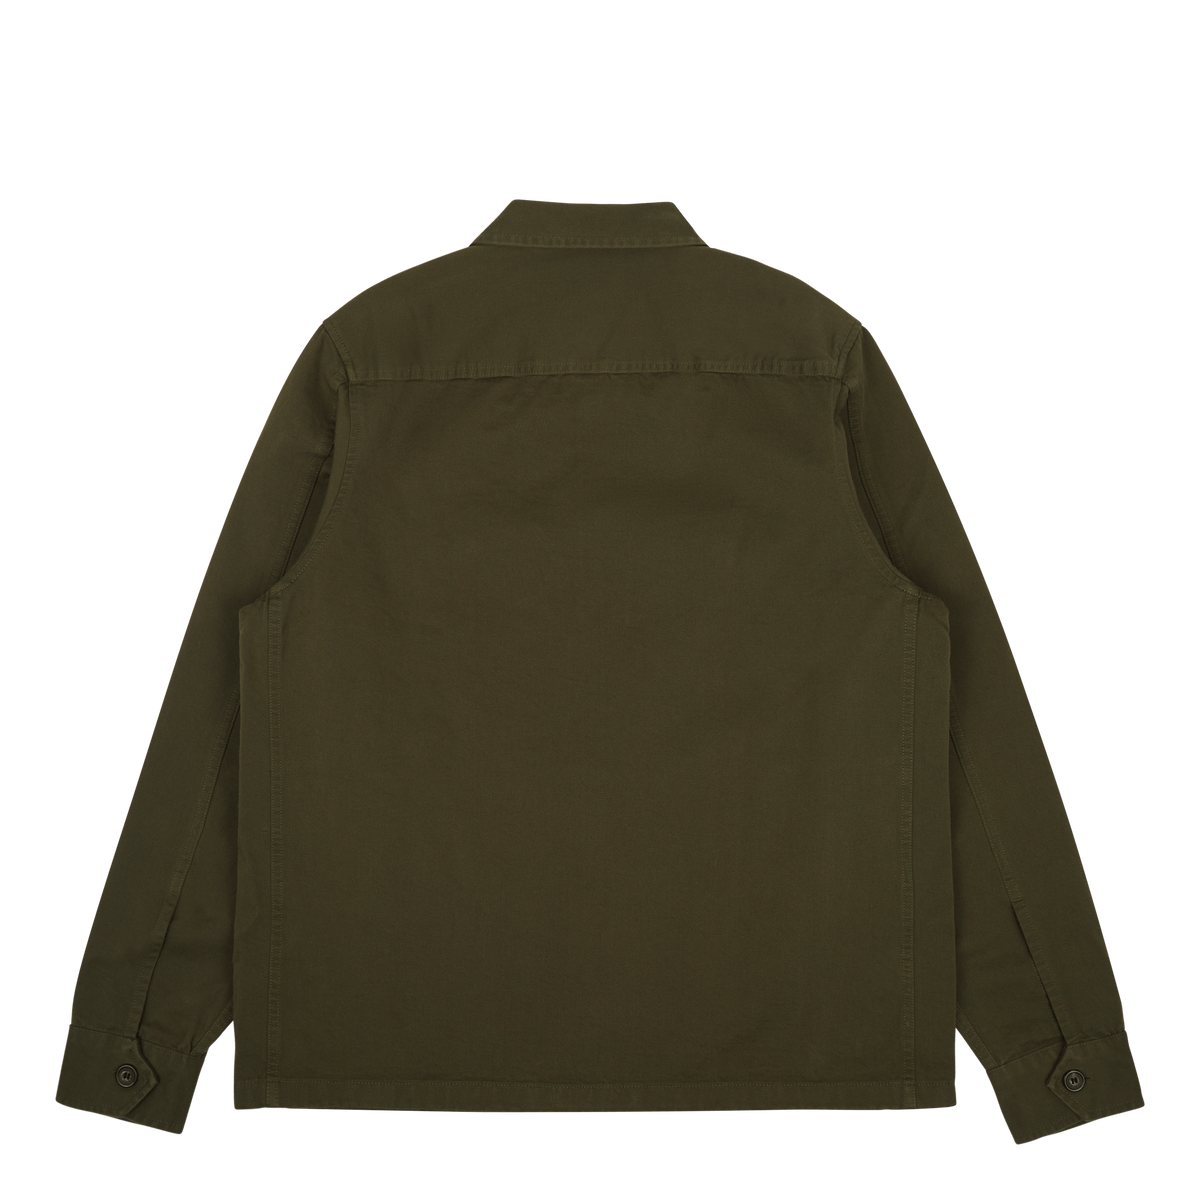 Fred Perry Twill Overshirt Q55